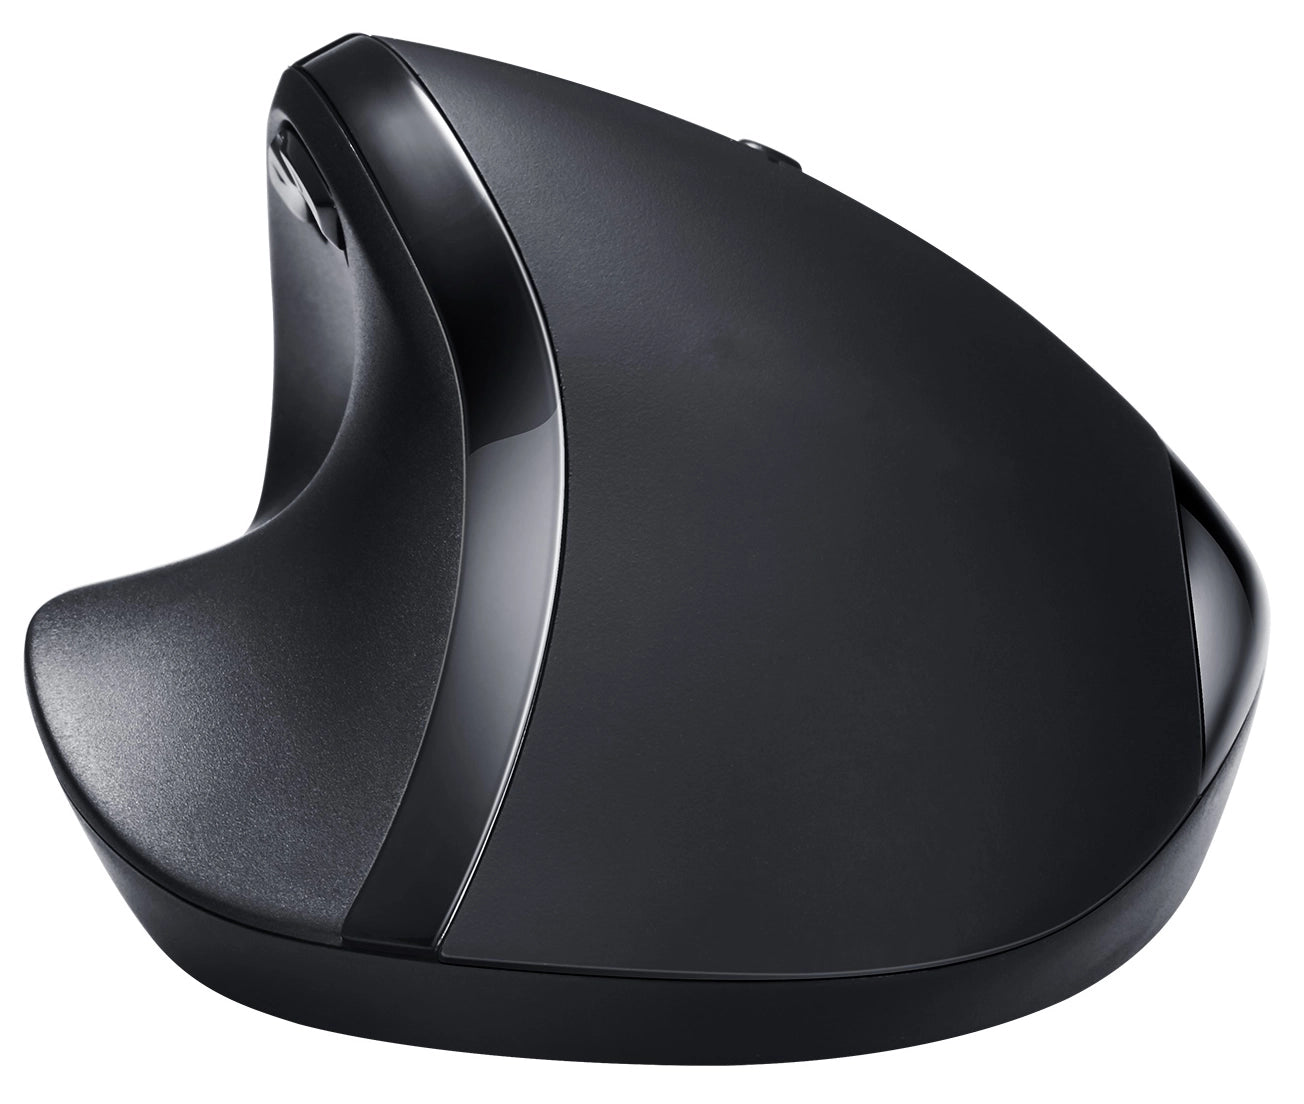 Newtral 3 Mouse - Small Wireless Ergonomic